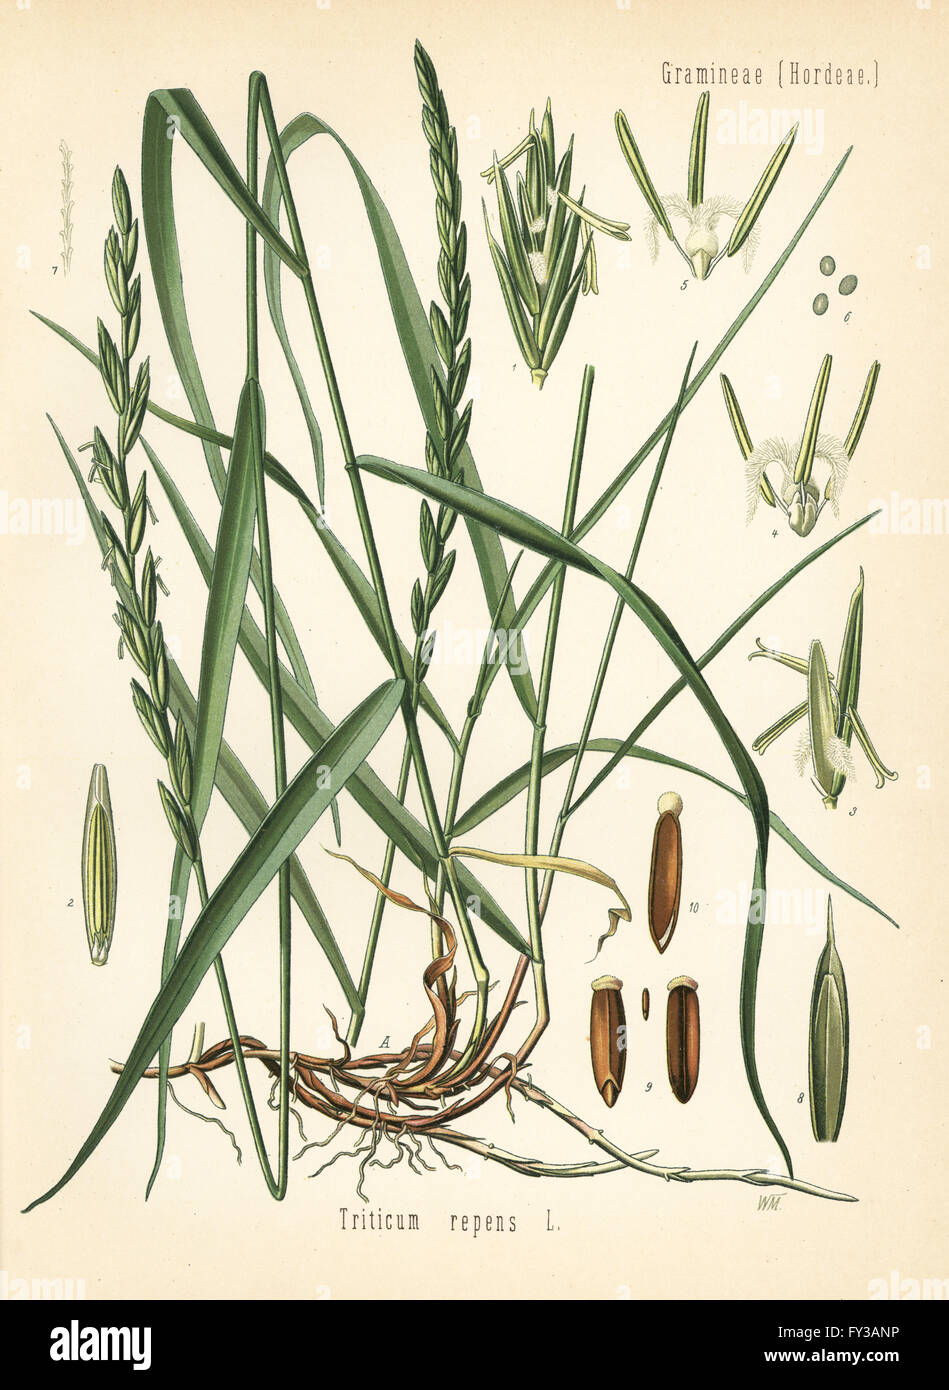 Couch grass, Elymus repens (Triticum repens). Chromolithograph after a botanical illustration by Walther Muller from Hermann Adolph Koehler's Medicinal Plants, edited by Gustav Pabst, Koehler, Germany, 1887. Stock Photo